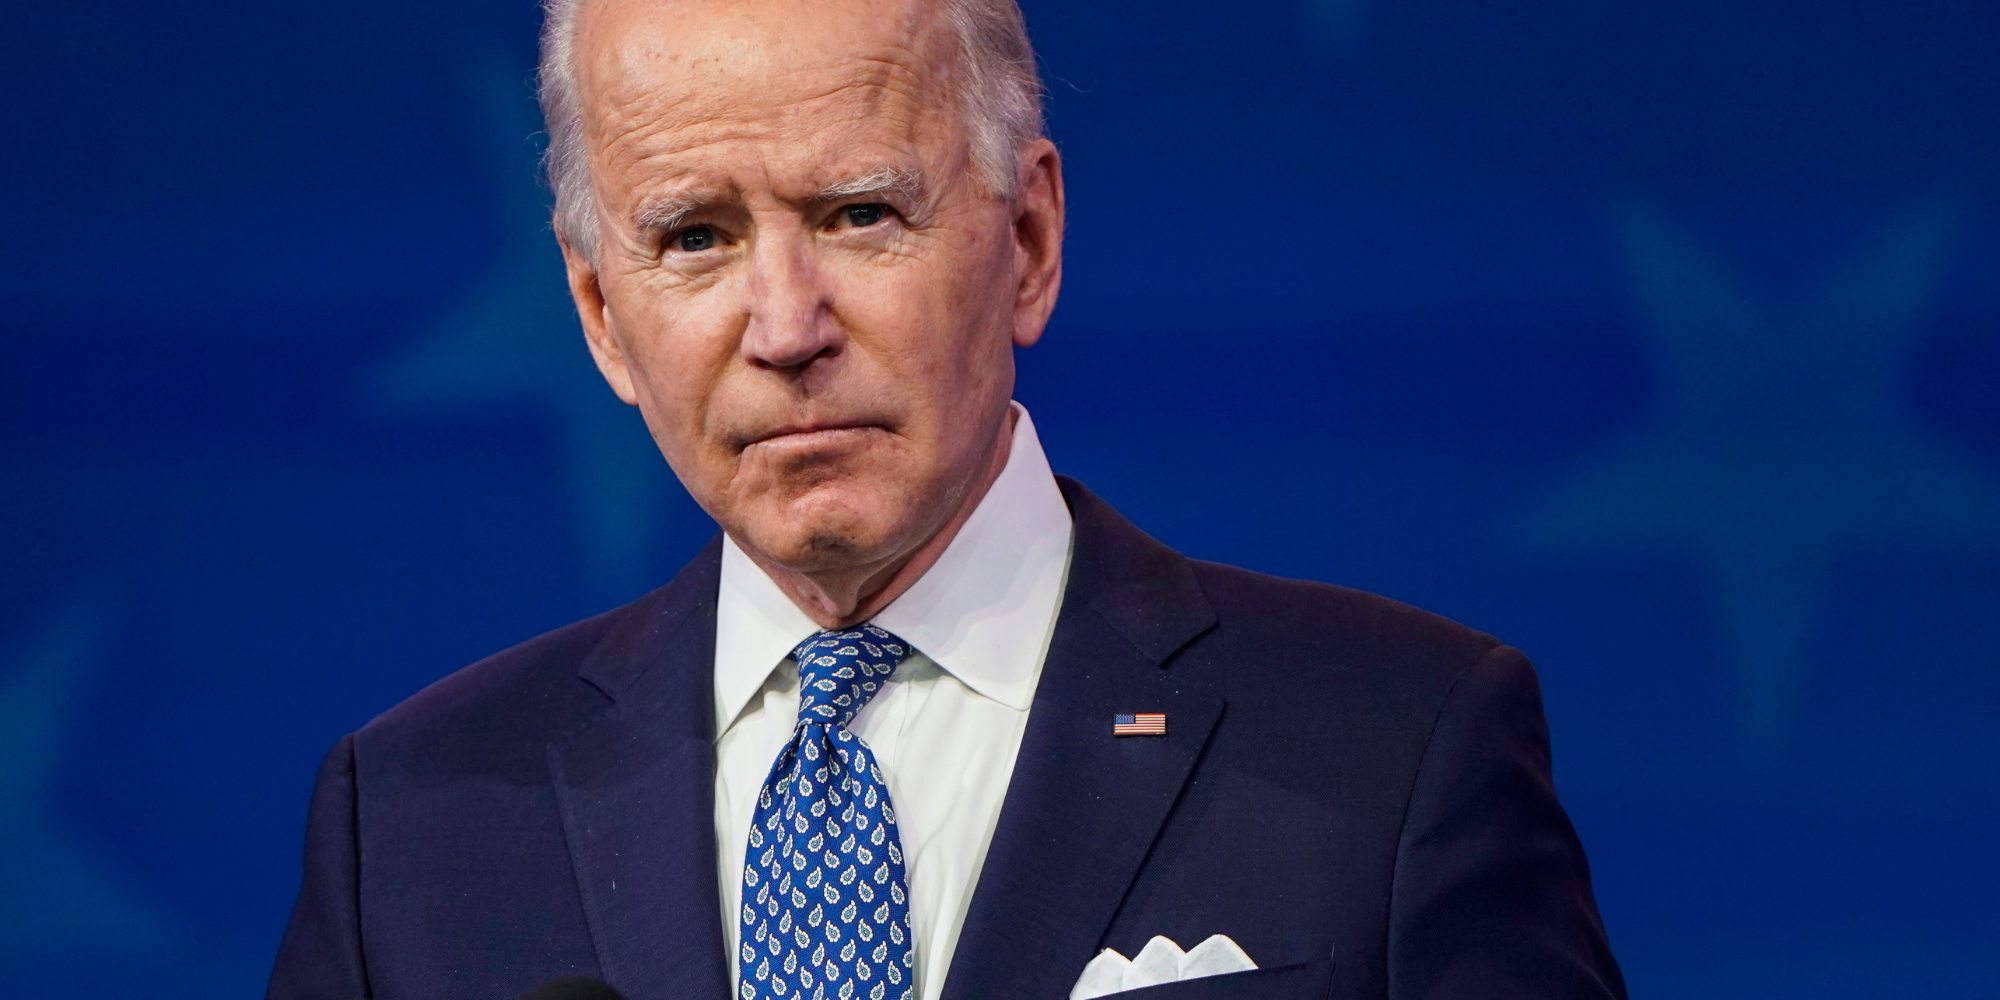 In January, Joe Biden will be sworn in as the 46th President of the United States